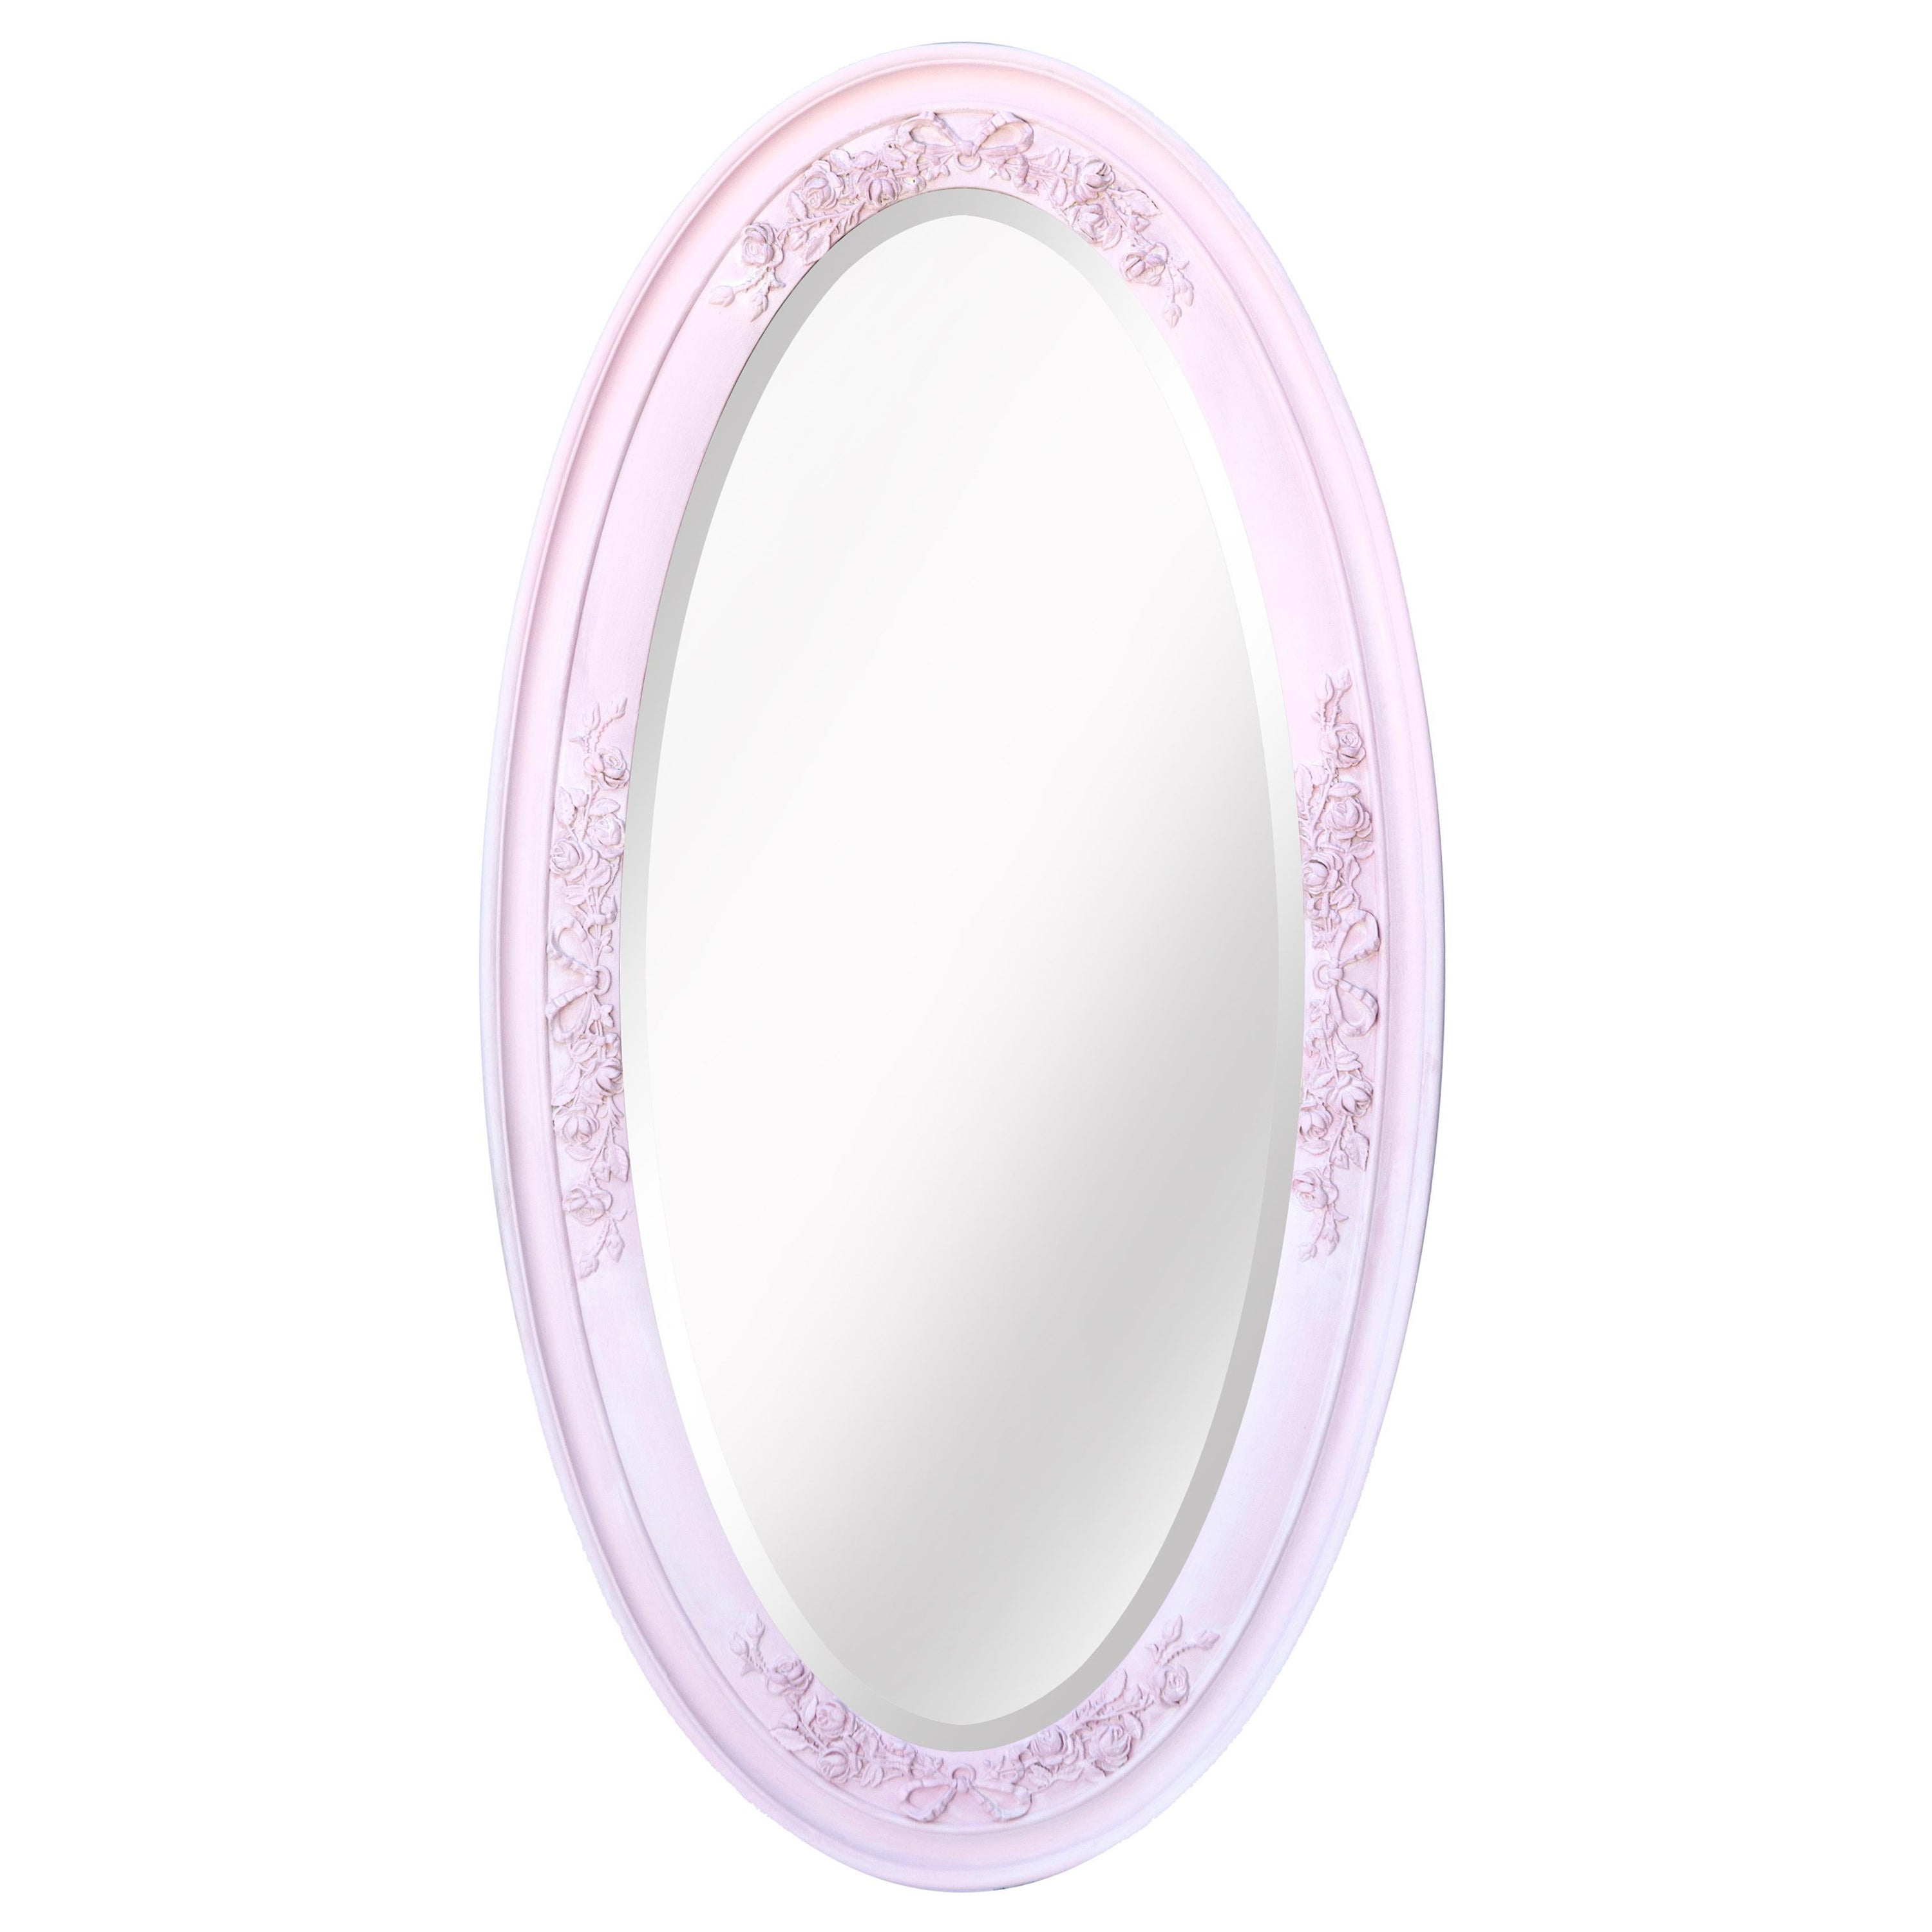 Tapered Pink Oval Mirror with Ribbons & Bows Bow in Shades of Pink